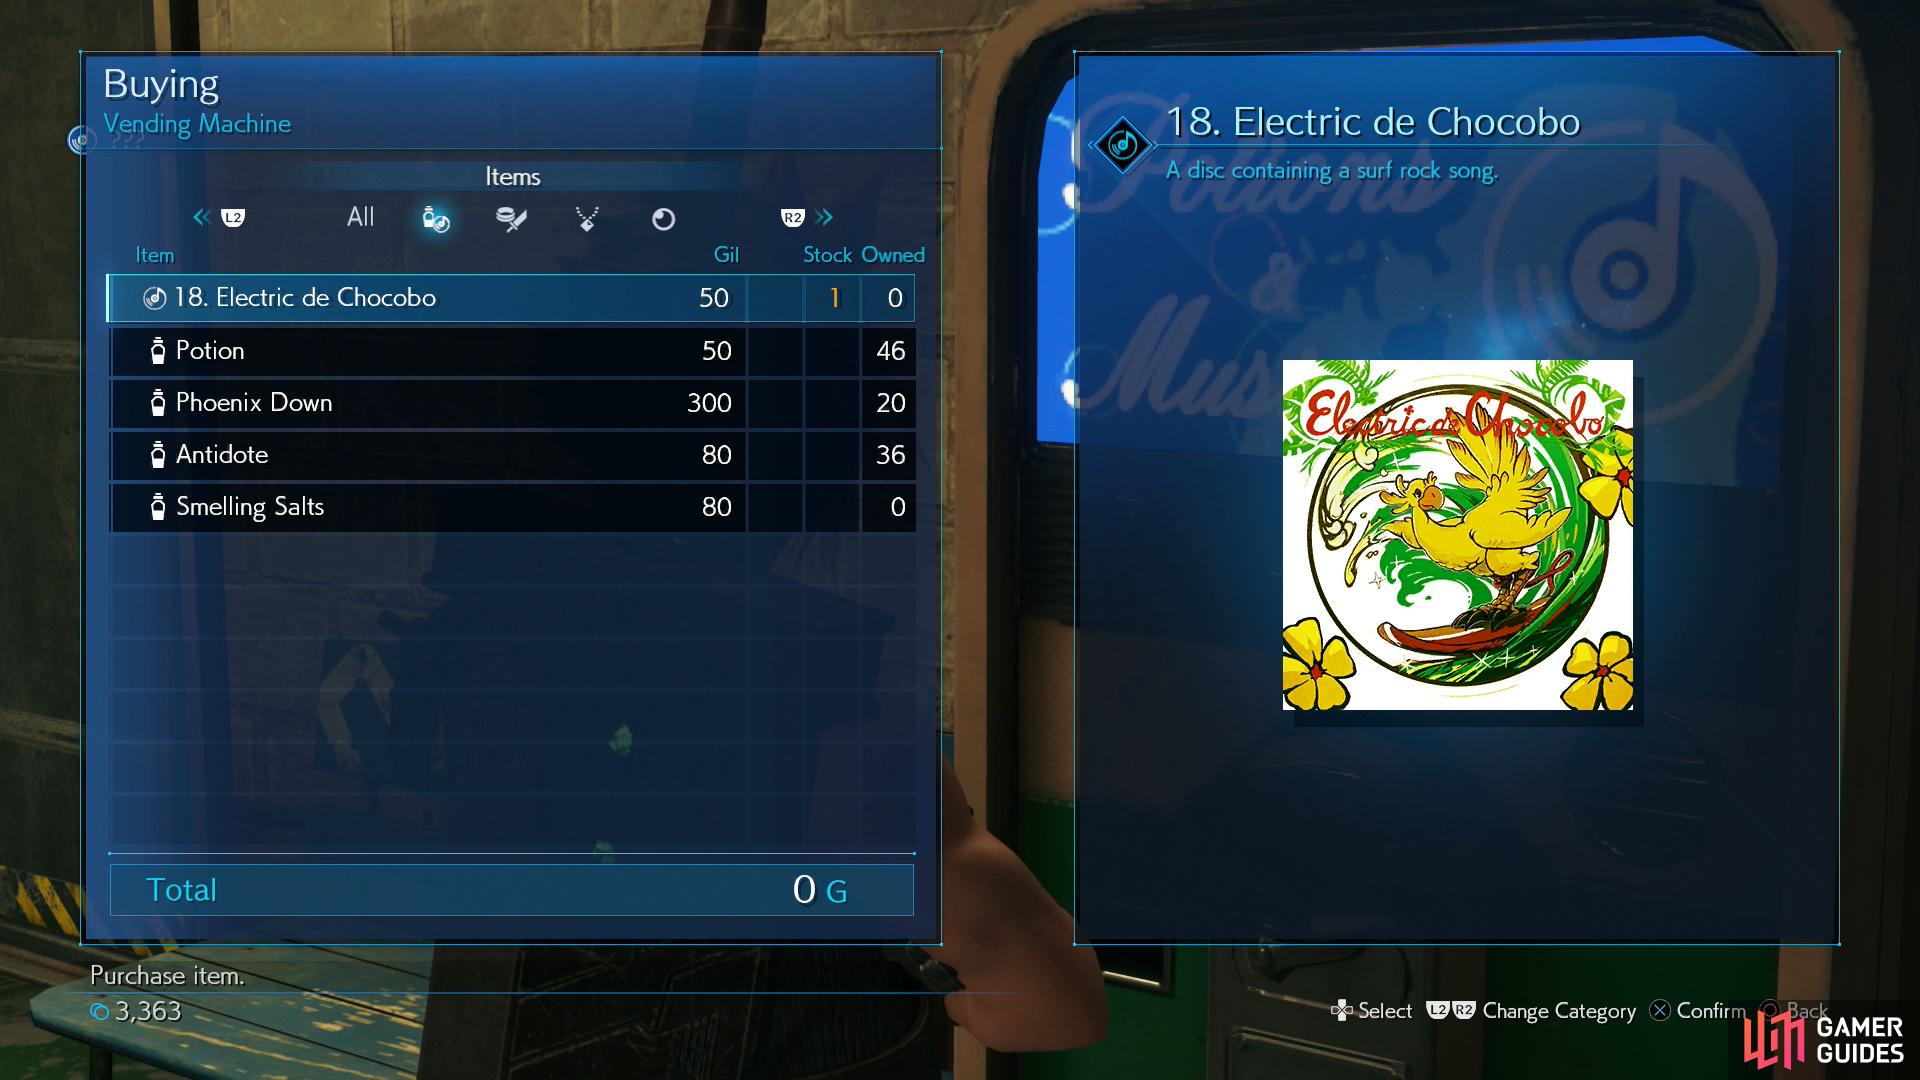 Be sure to buy the Electric de Chocobo Music Disc.